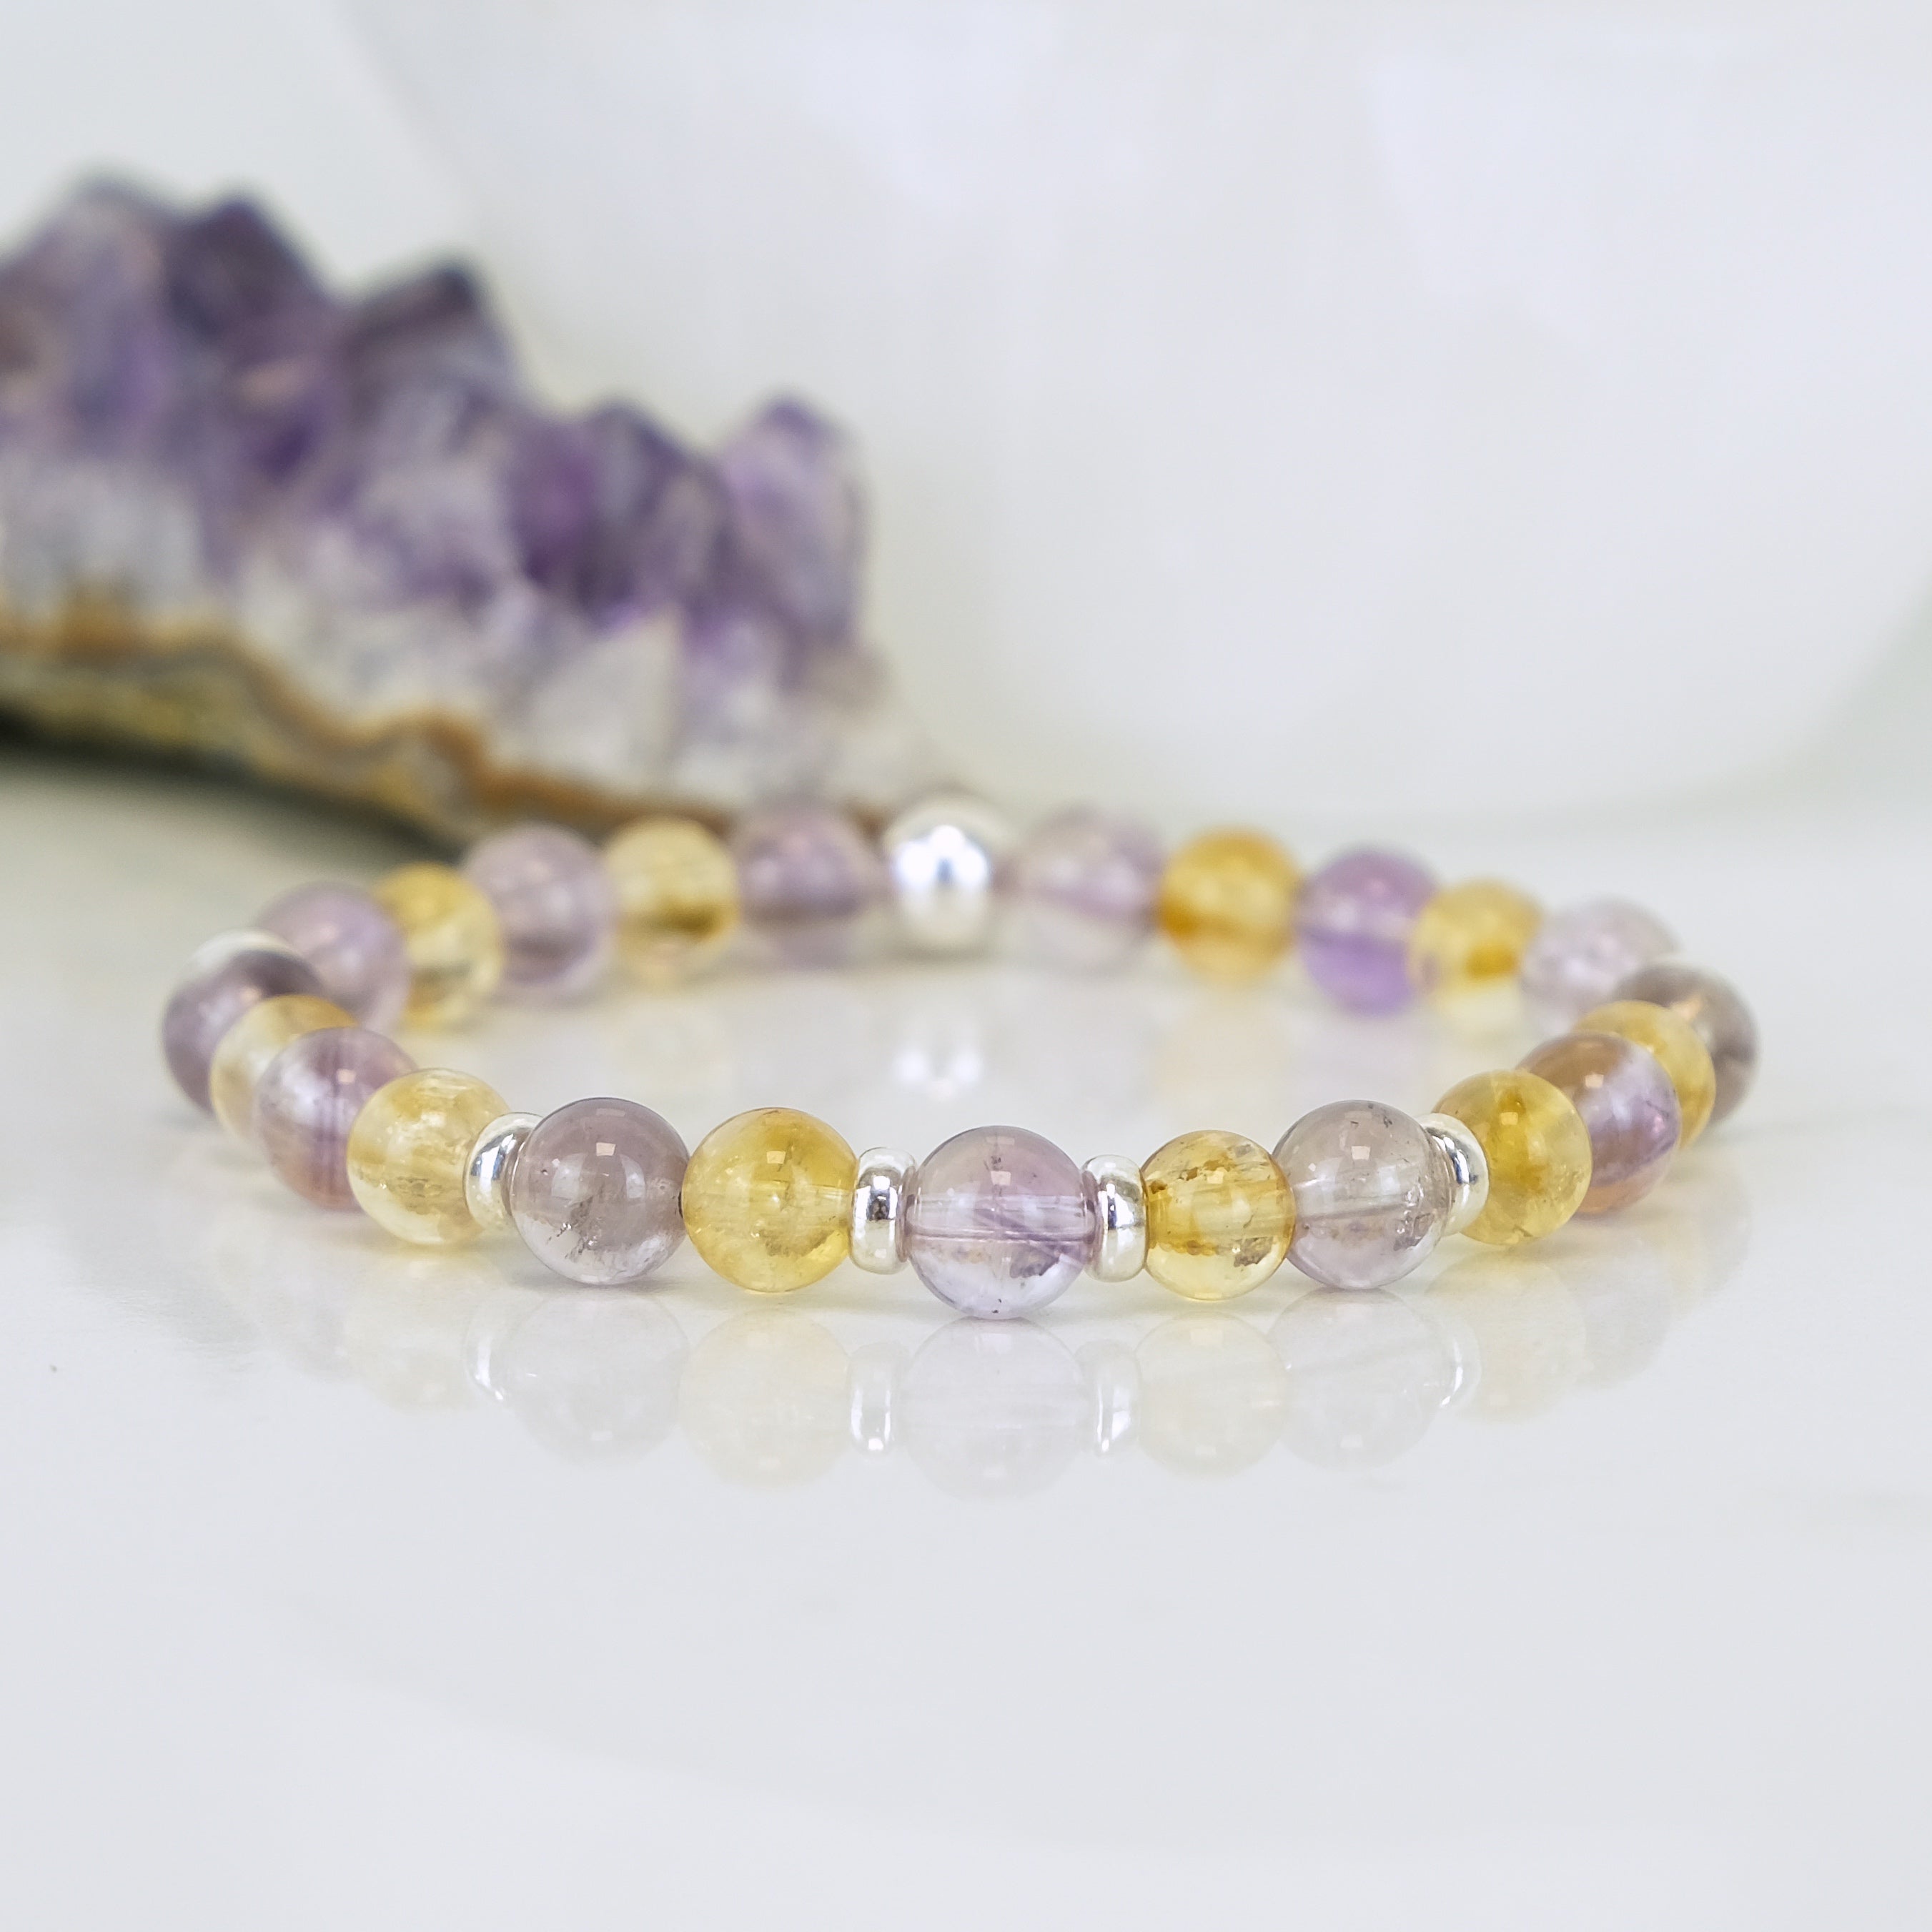 An Amethyst and citrine gemstone bracelet with 925 sterling silver accessories